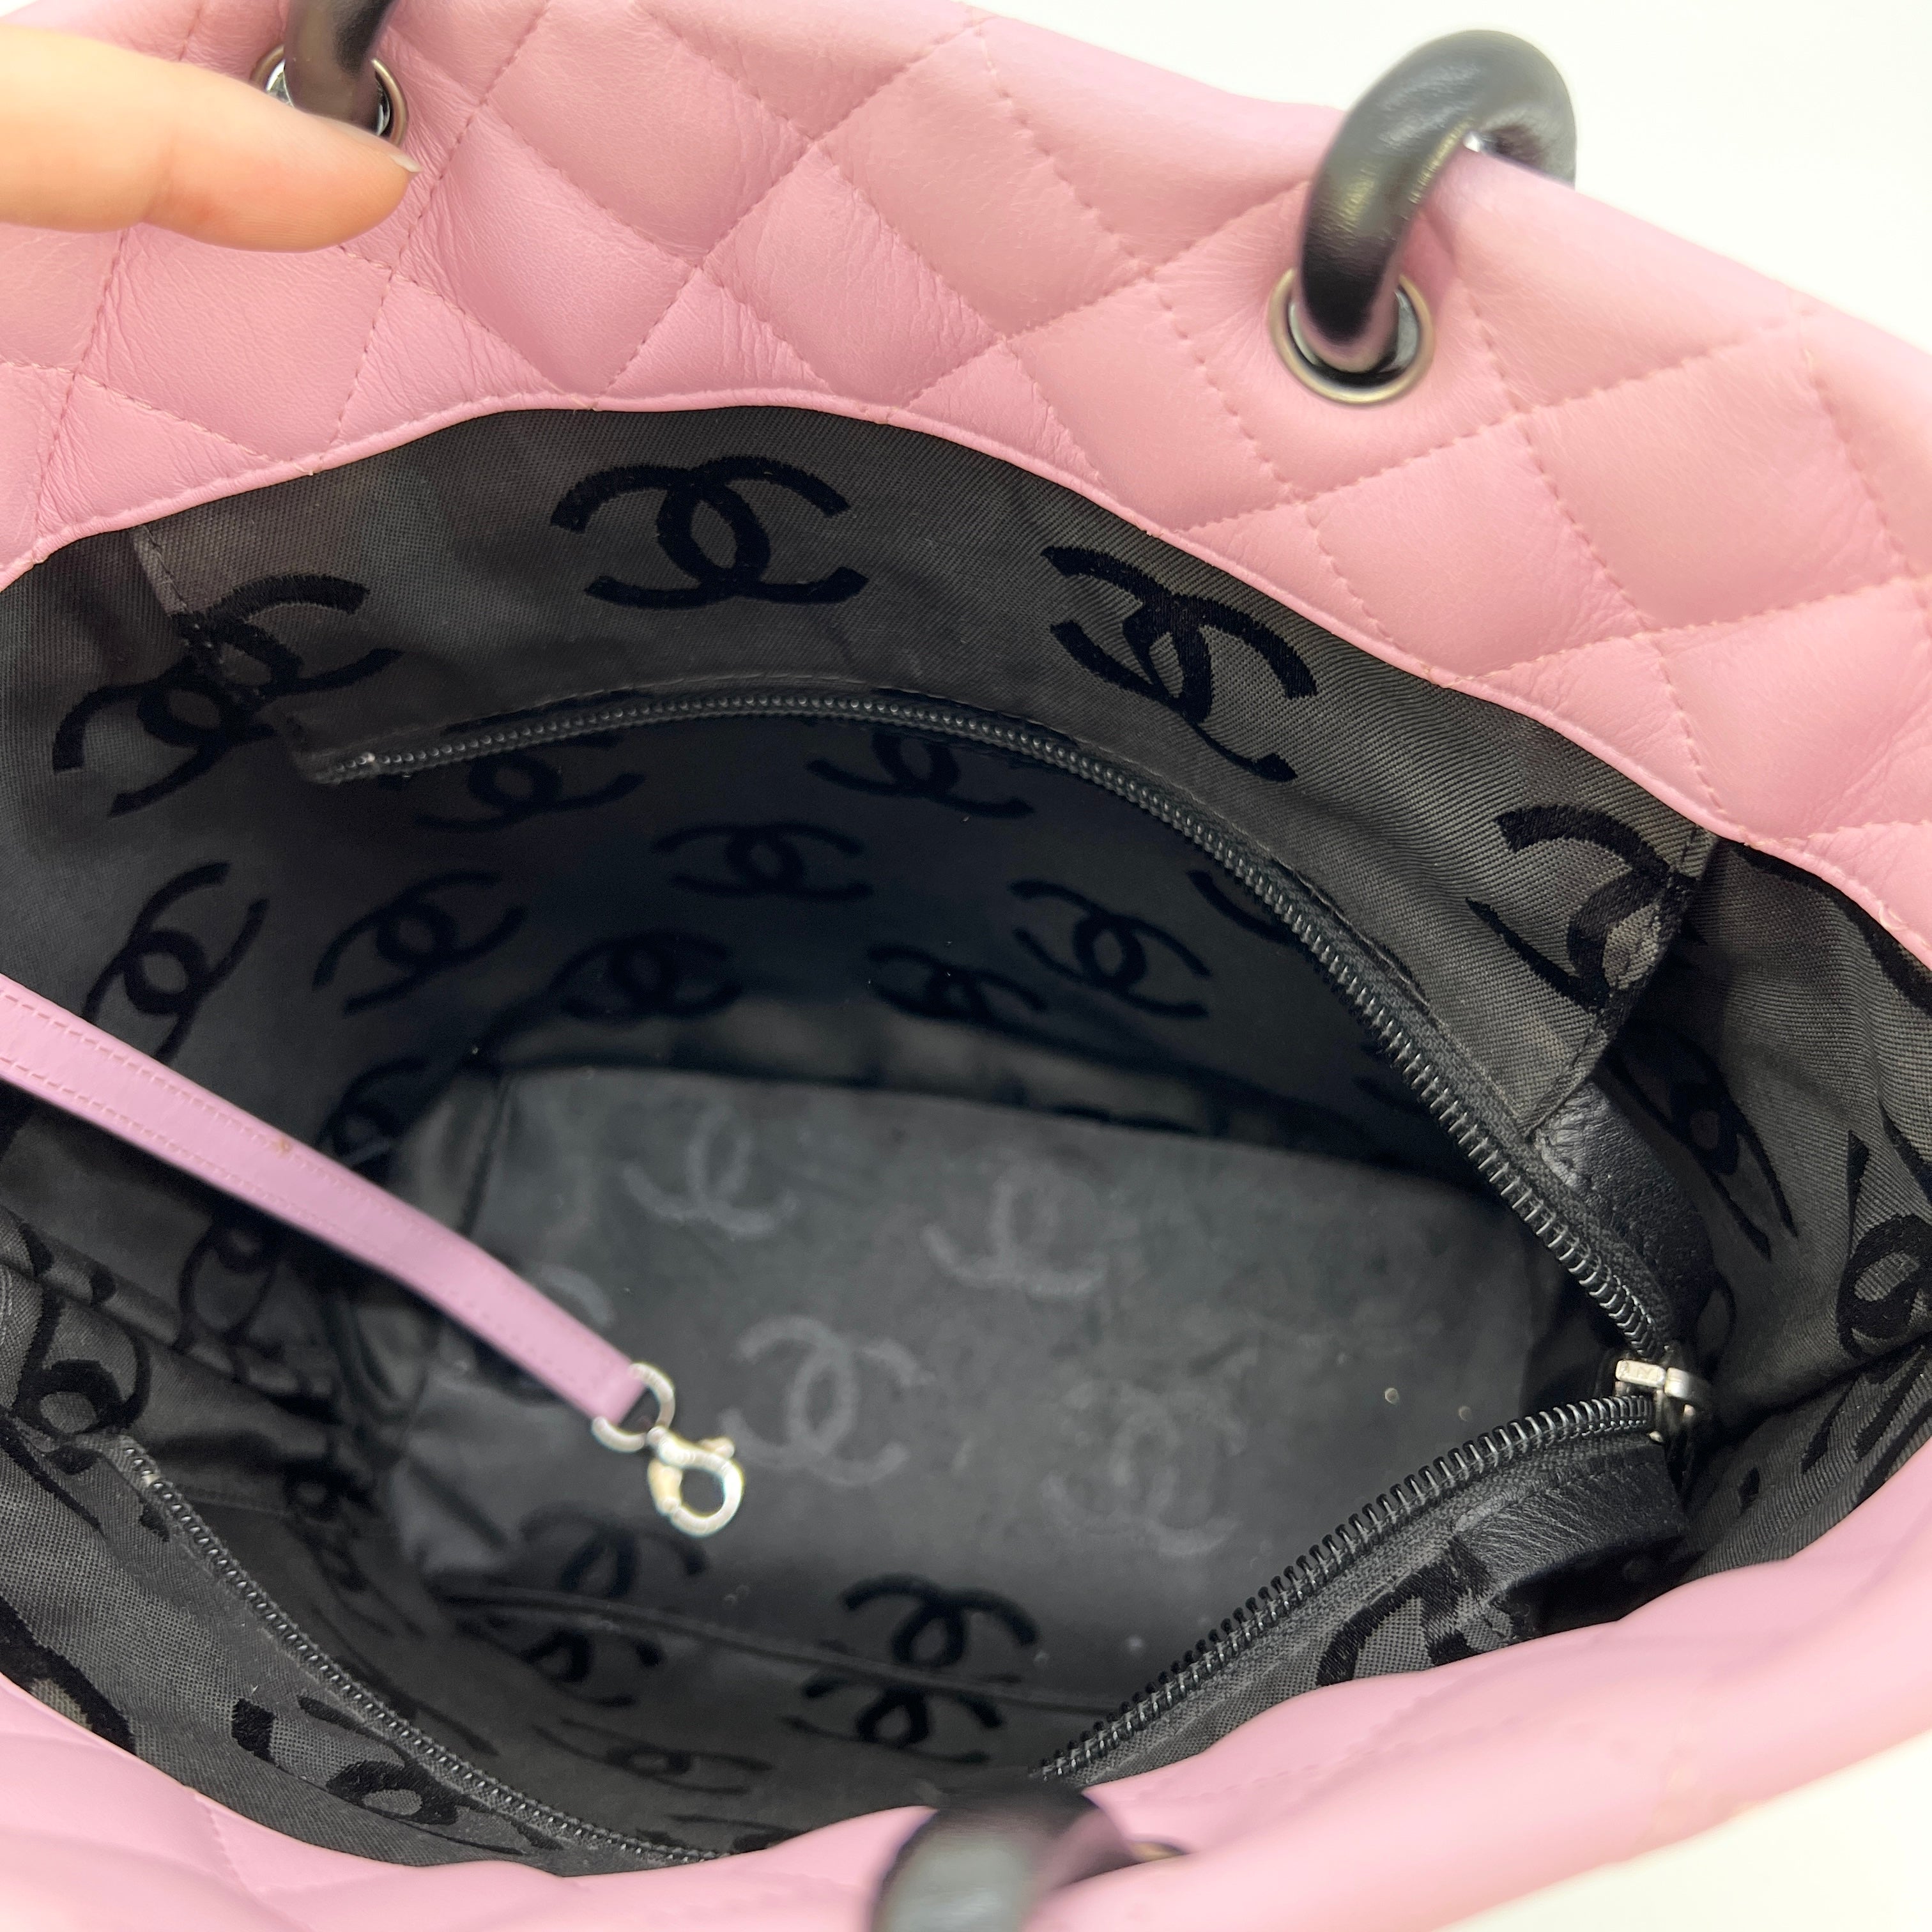 CHANEL Zip Tote Bags & Handbags for Women, Authenticity Guaranteed